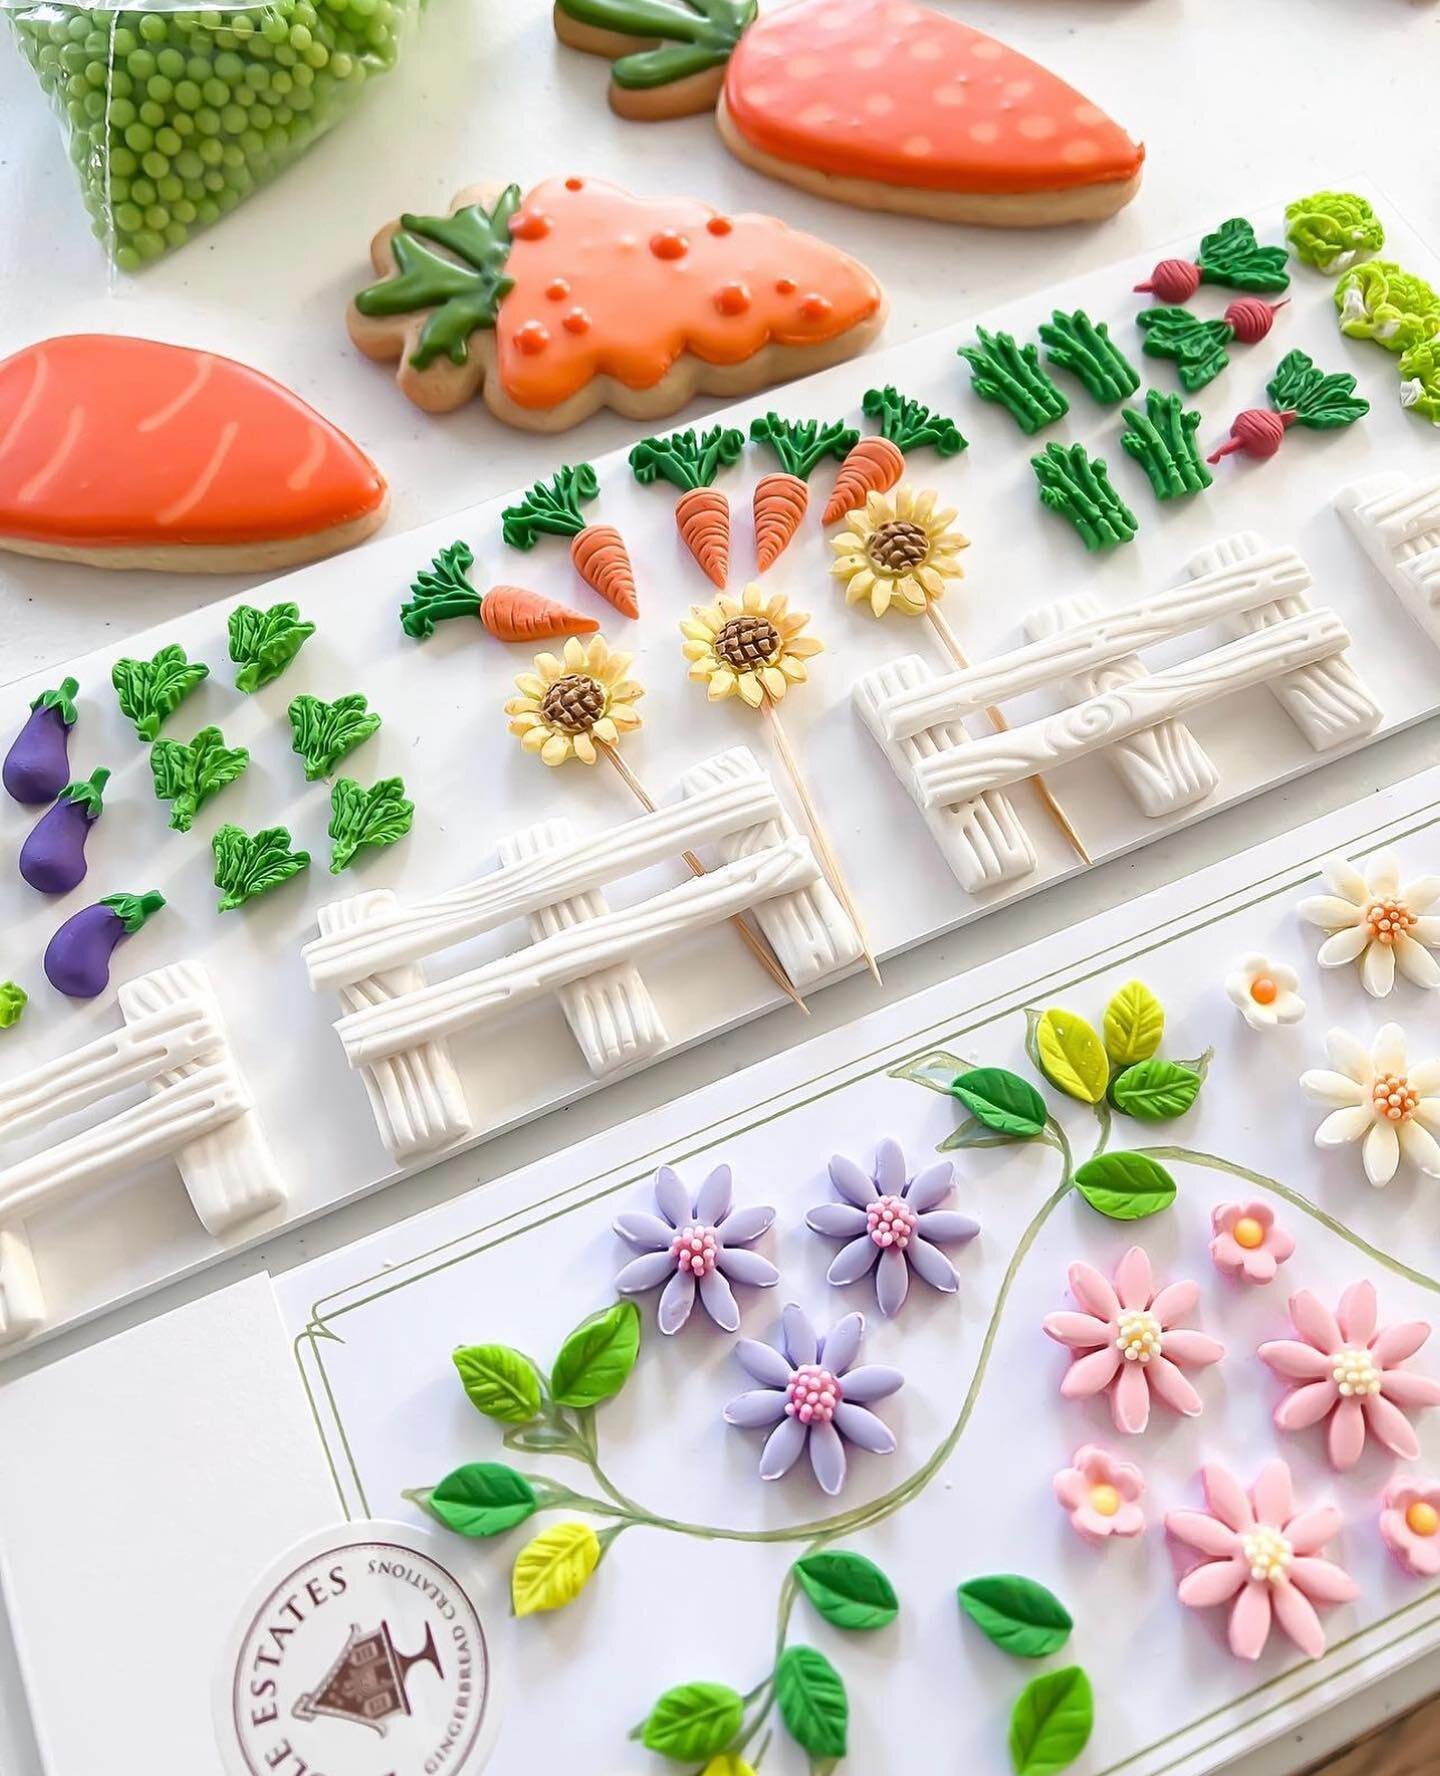 We mean it when we say &quot;details matter&quot; and these sugar accessories truly speak for themselves 🤎 They're almost too cute to eat. Head to our website to view all of our beautiful Spring Collection.⁣
⁣
www.edibleestates.com⁣
⁣
⁣
⁣
#edibleest